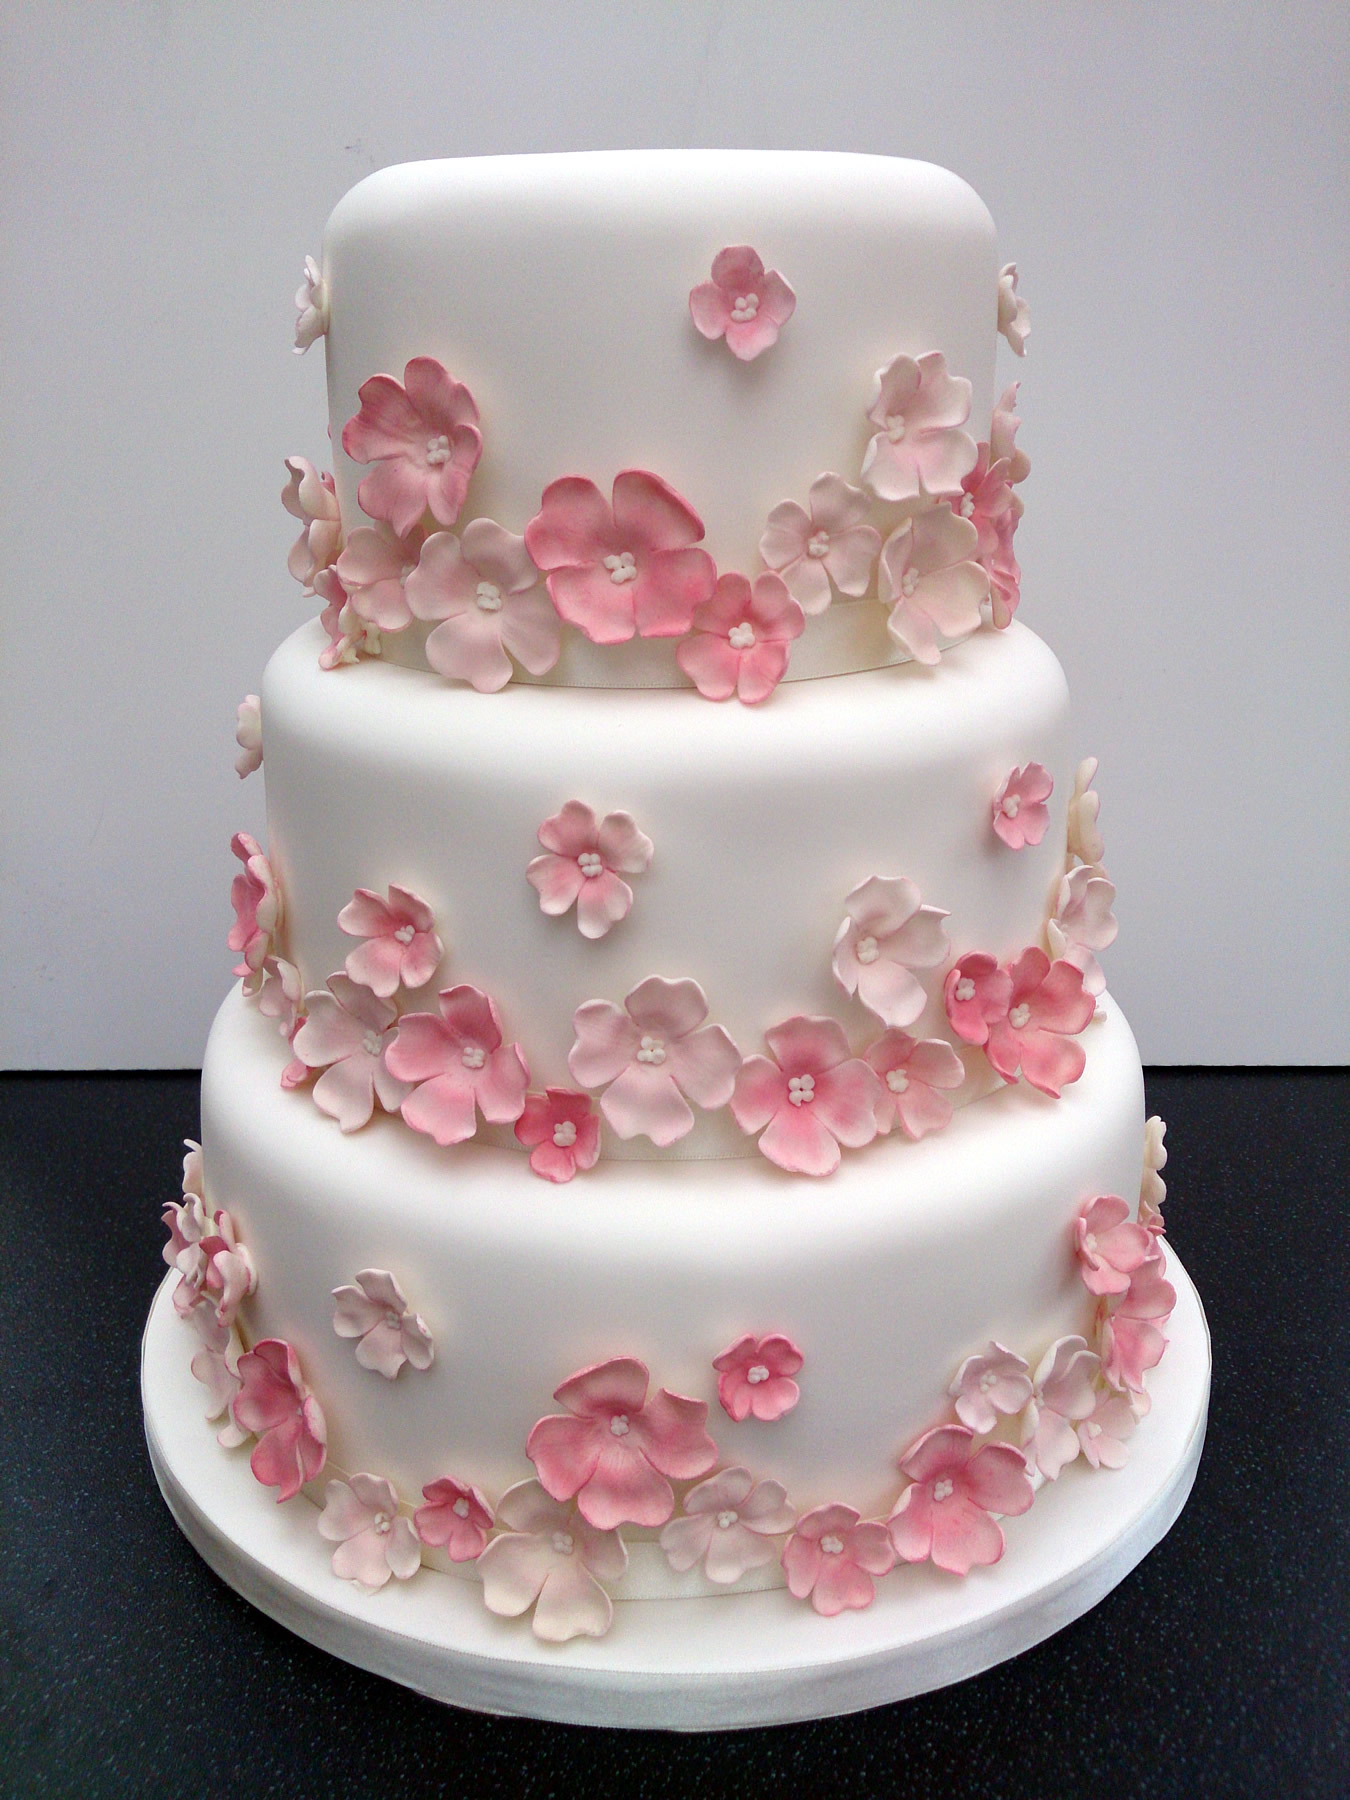 Premium Photo | Pink cake for a little or big princess. trendy korean style  cake decorated with little cream flowers.